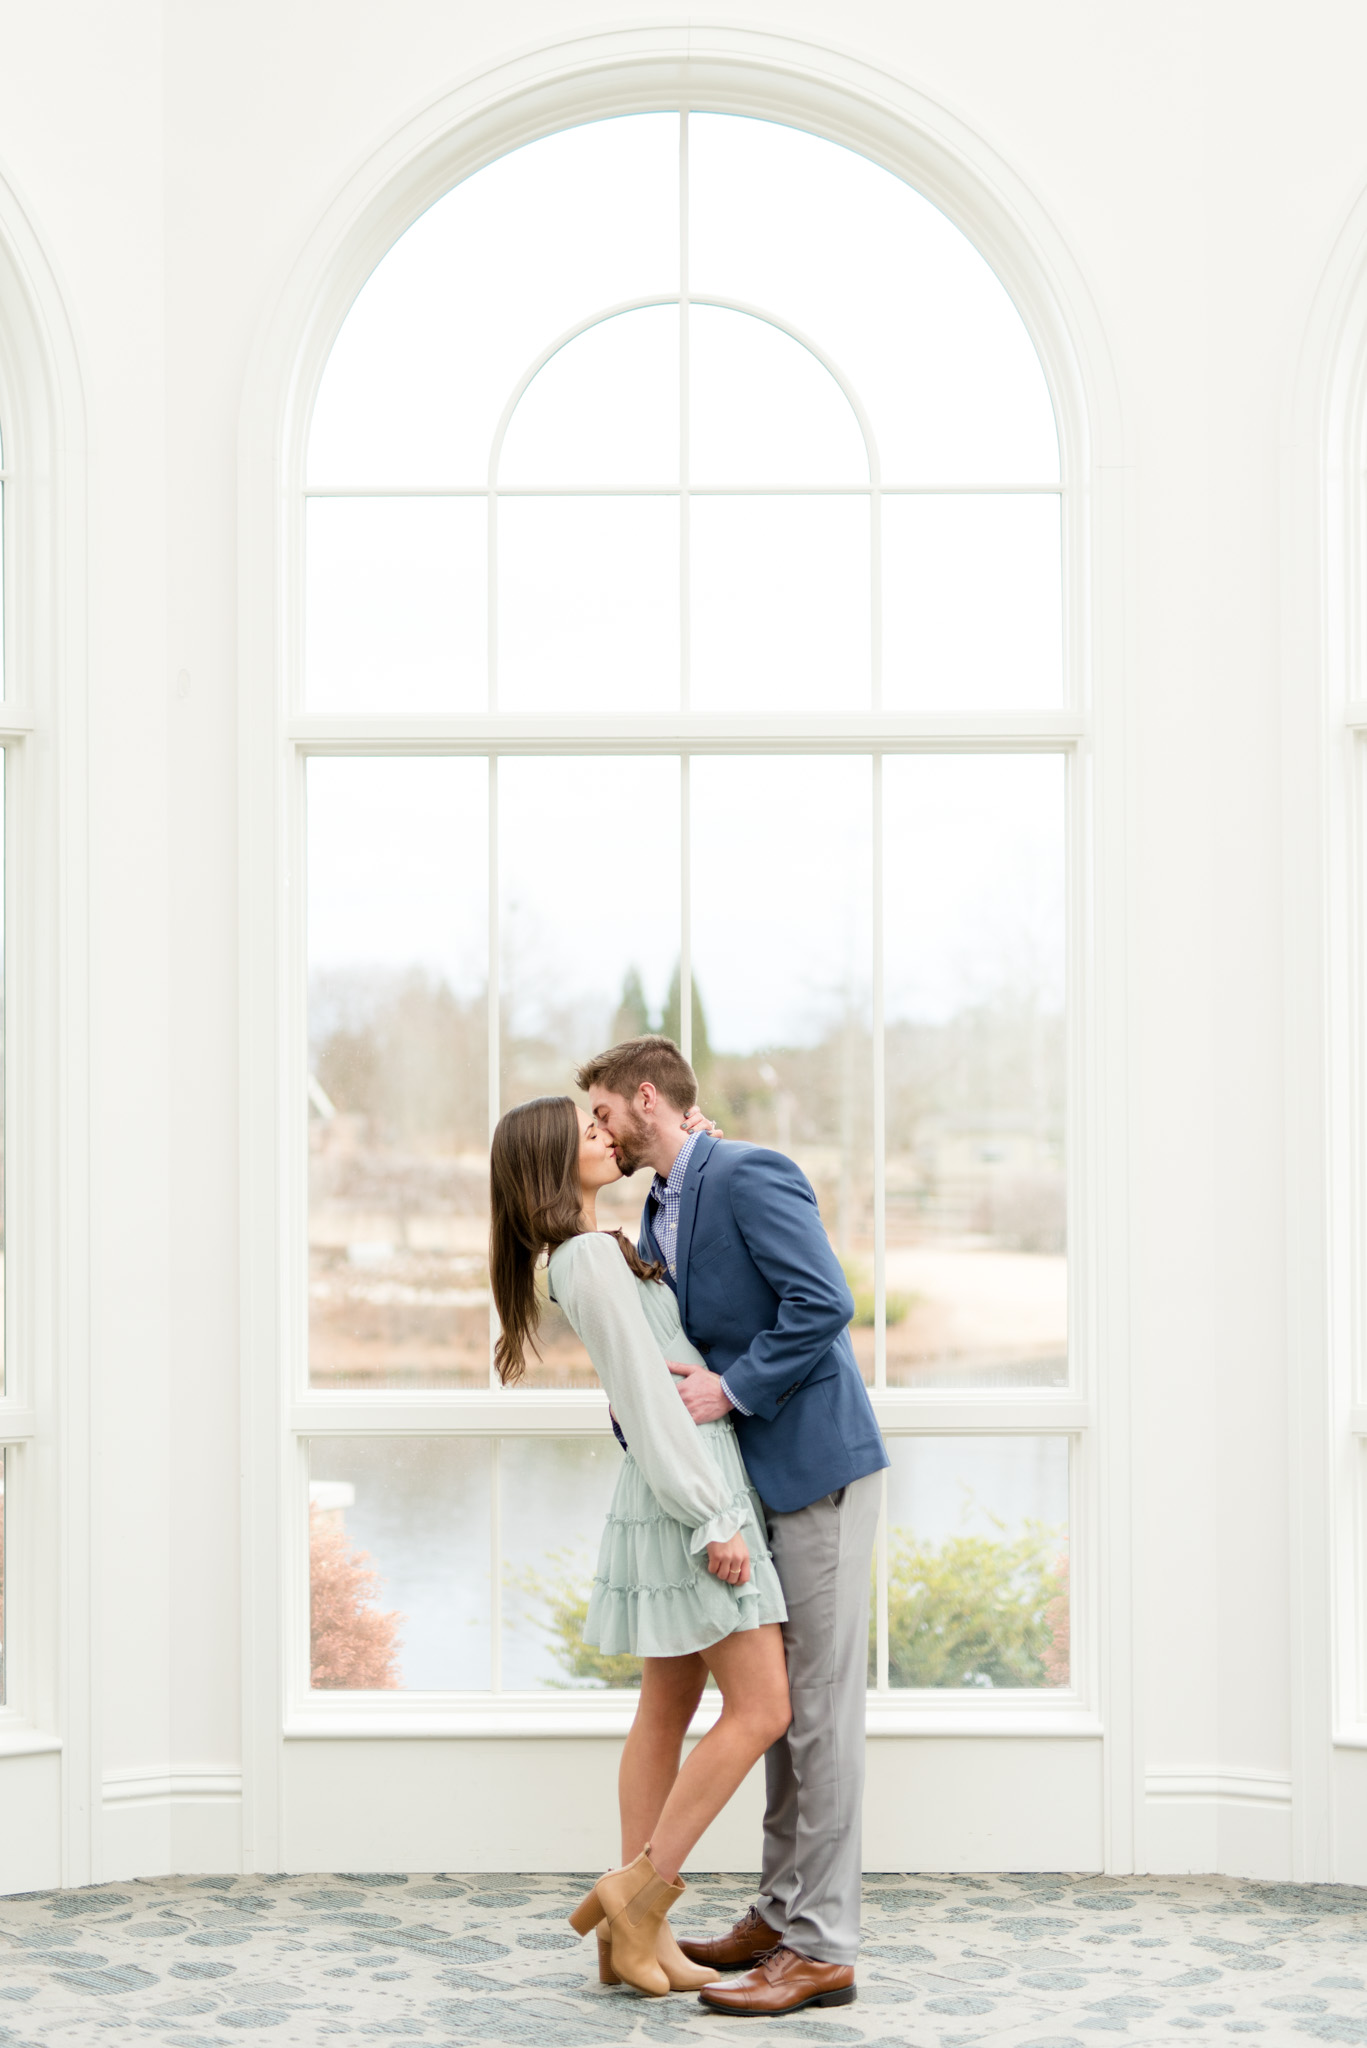 Couple kisses in front of grand window.